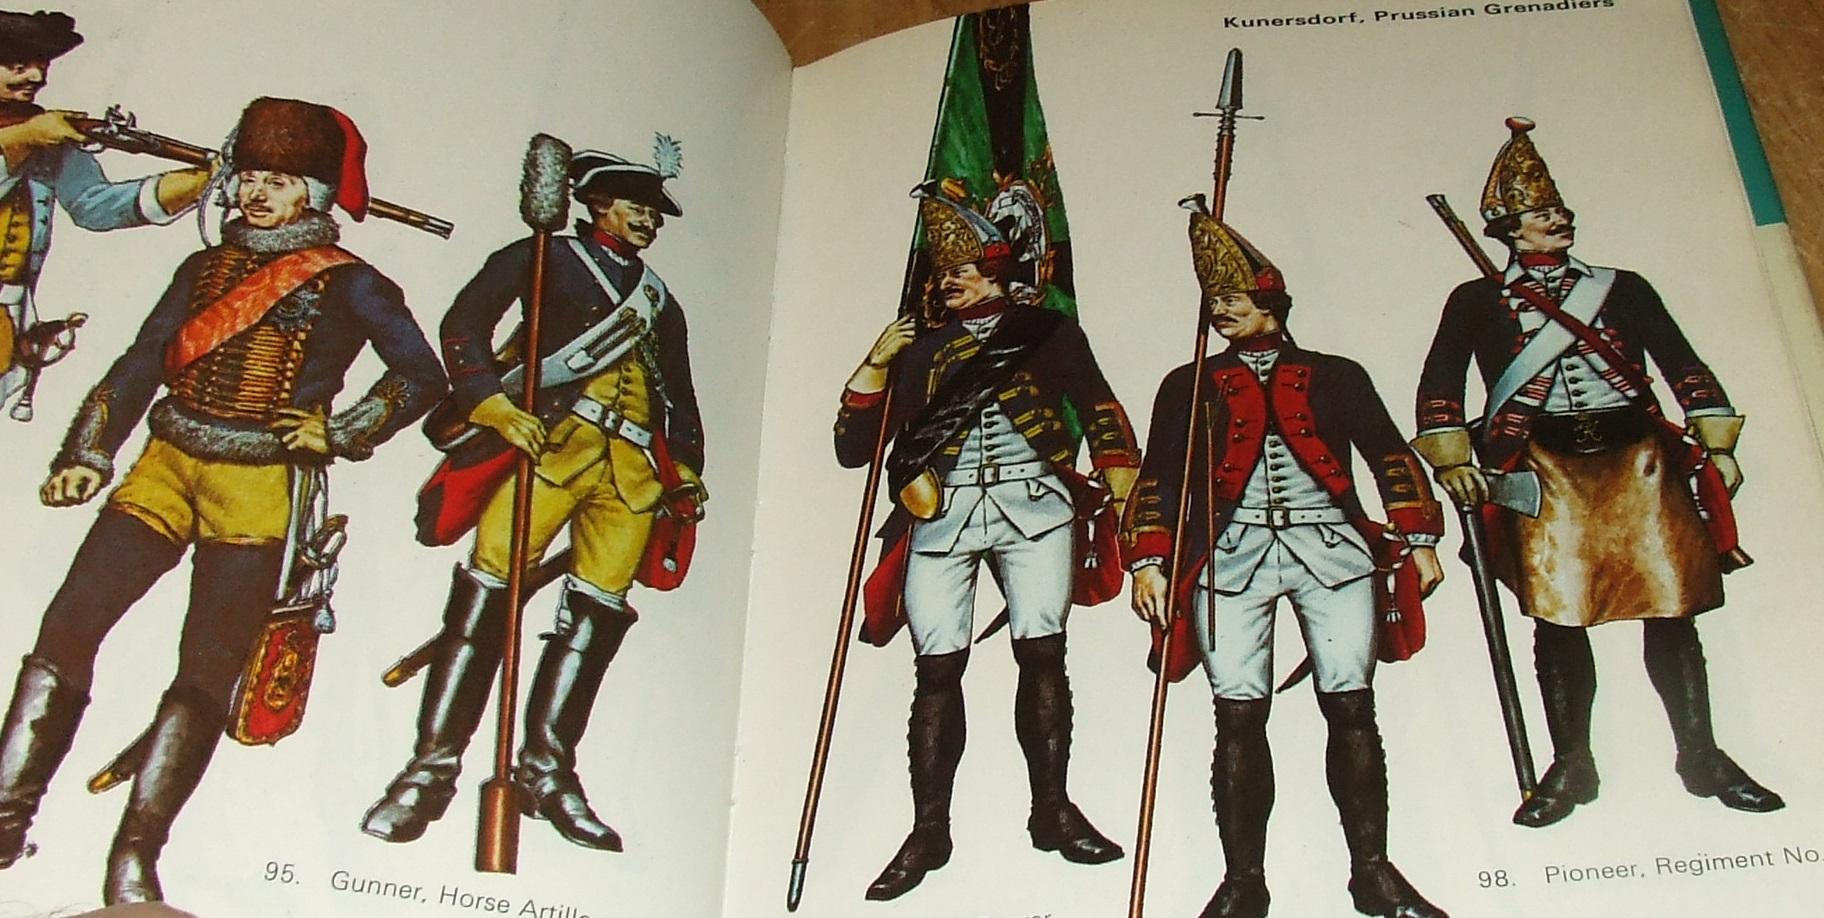 Uniforms of the Seven Years War 1756-63